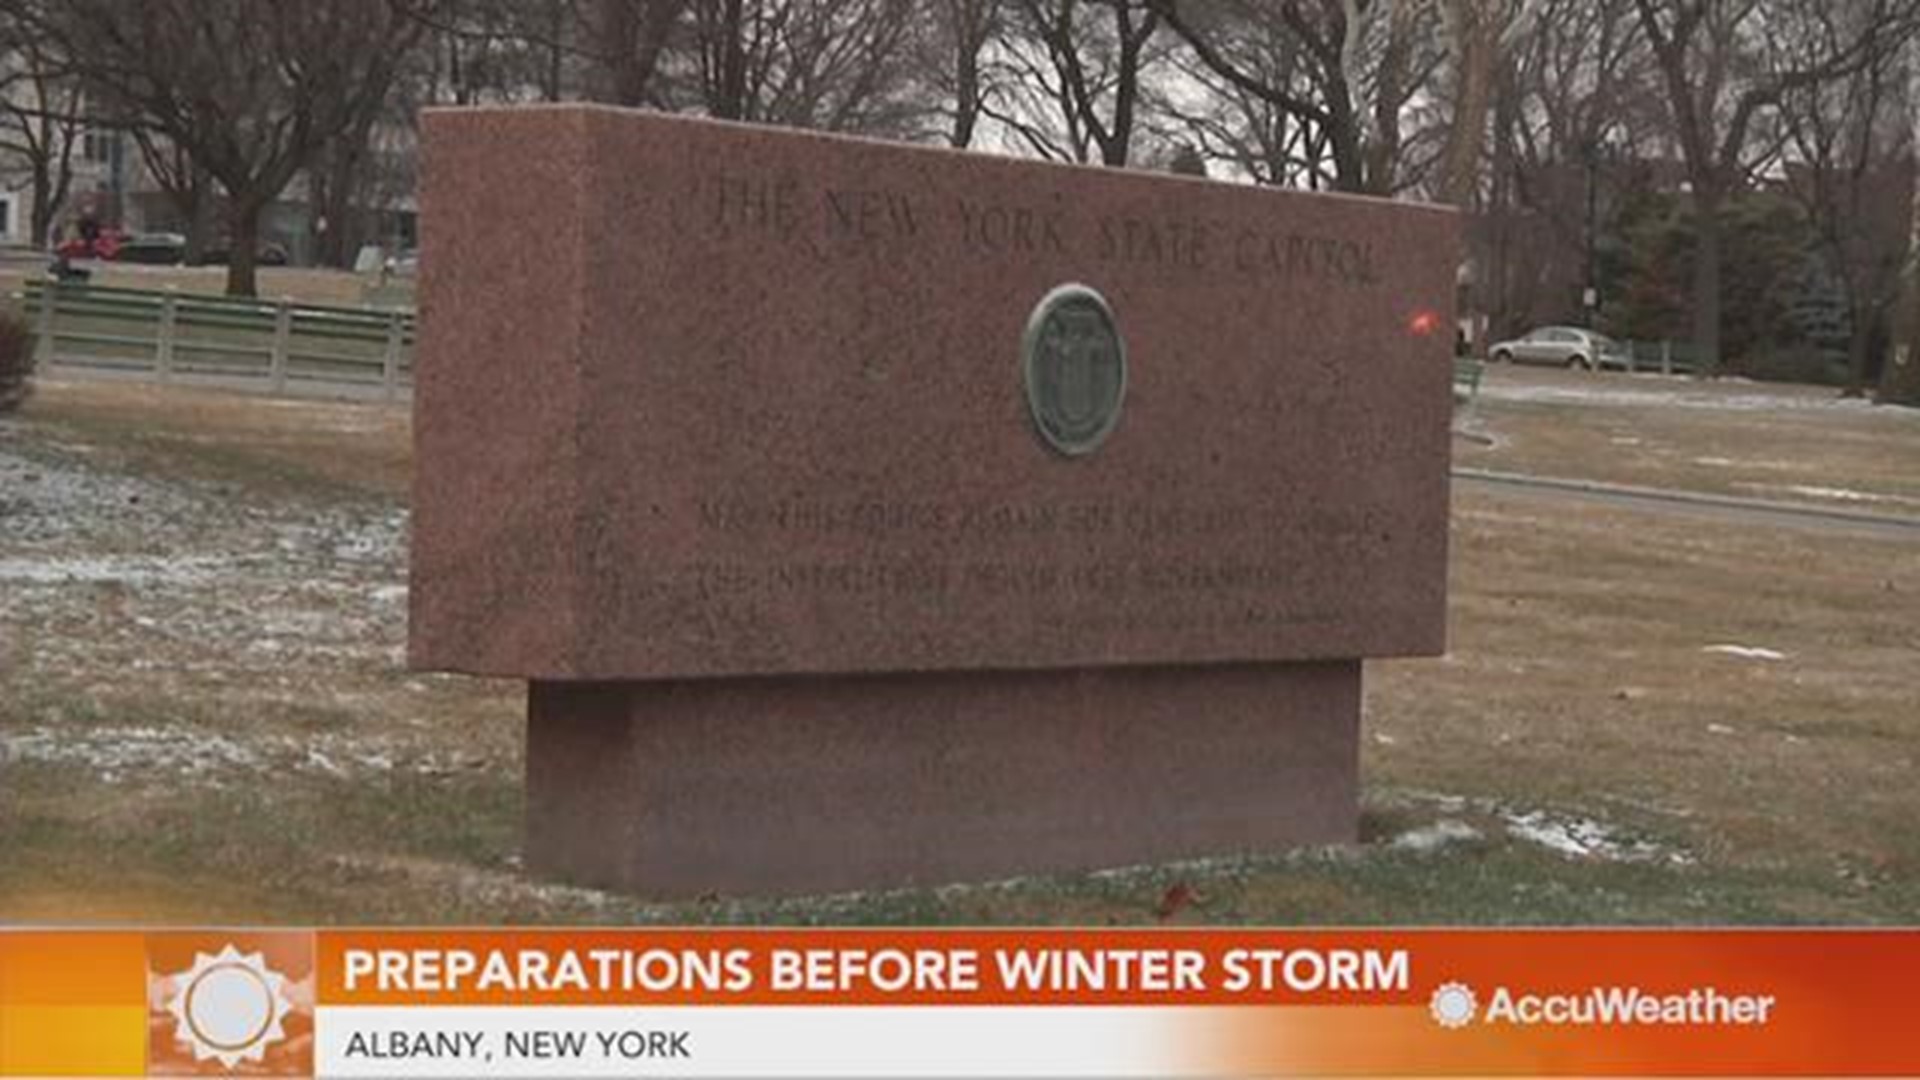 The northeast is bracing for winter storms this weekend. In Albany, New York Snow totals could top 18 inches. Crews prep for days of cleanup in the area.